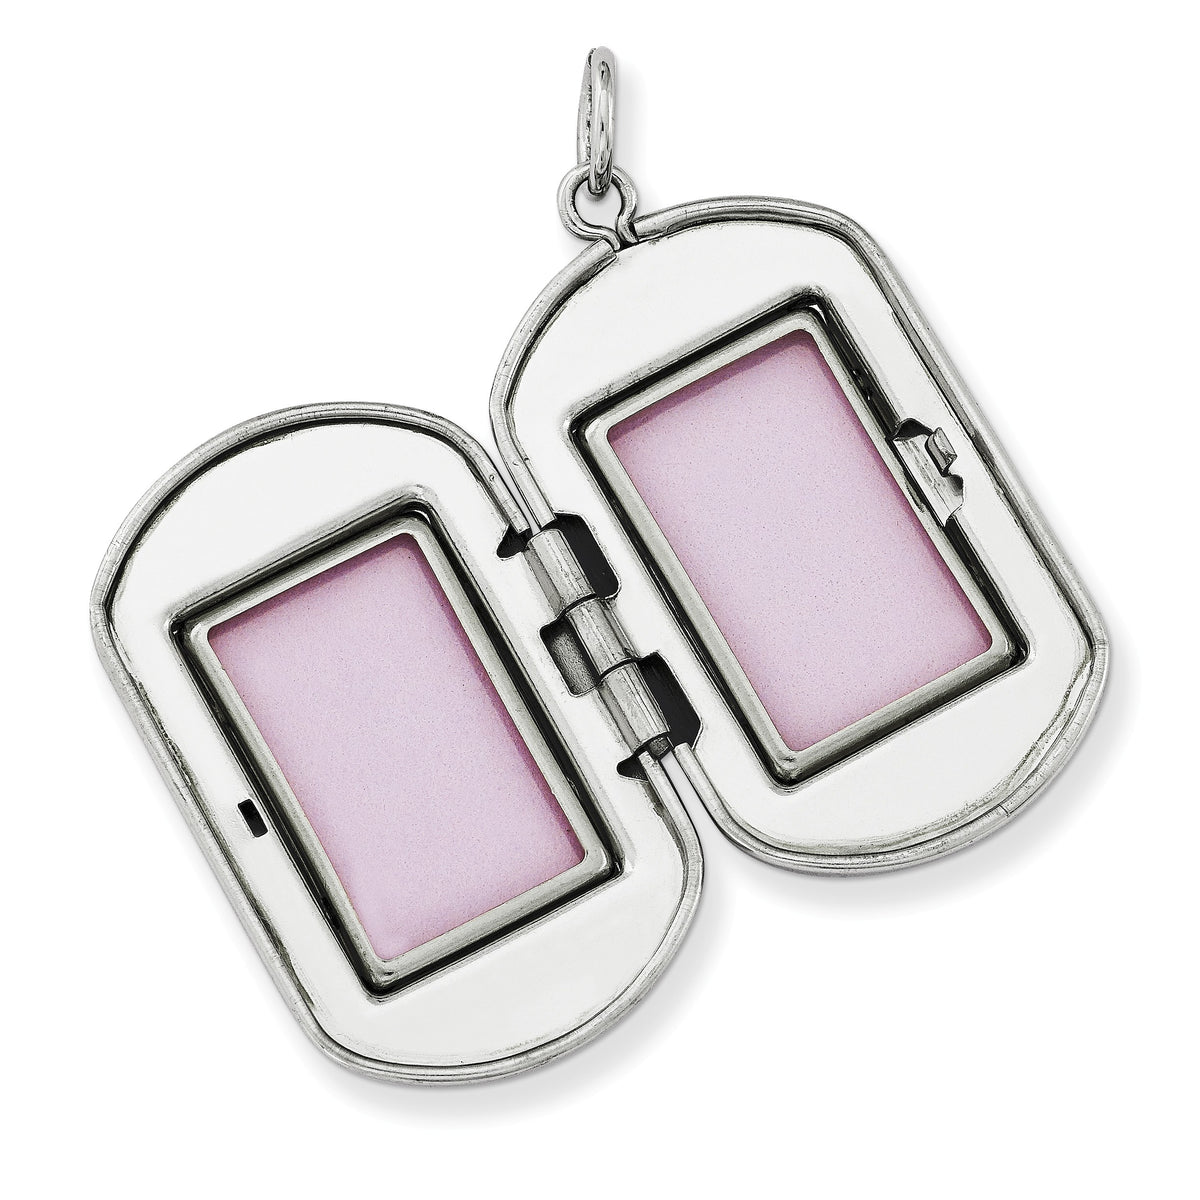 Alternate view of the Sterling Silver 30mm Greek Key Border Rectangular Locket by The Black Bow Jewelry Co.